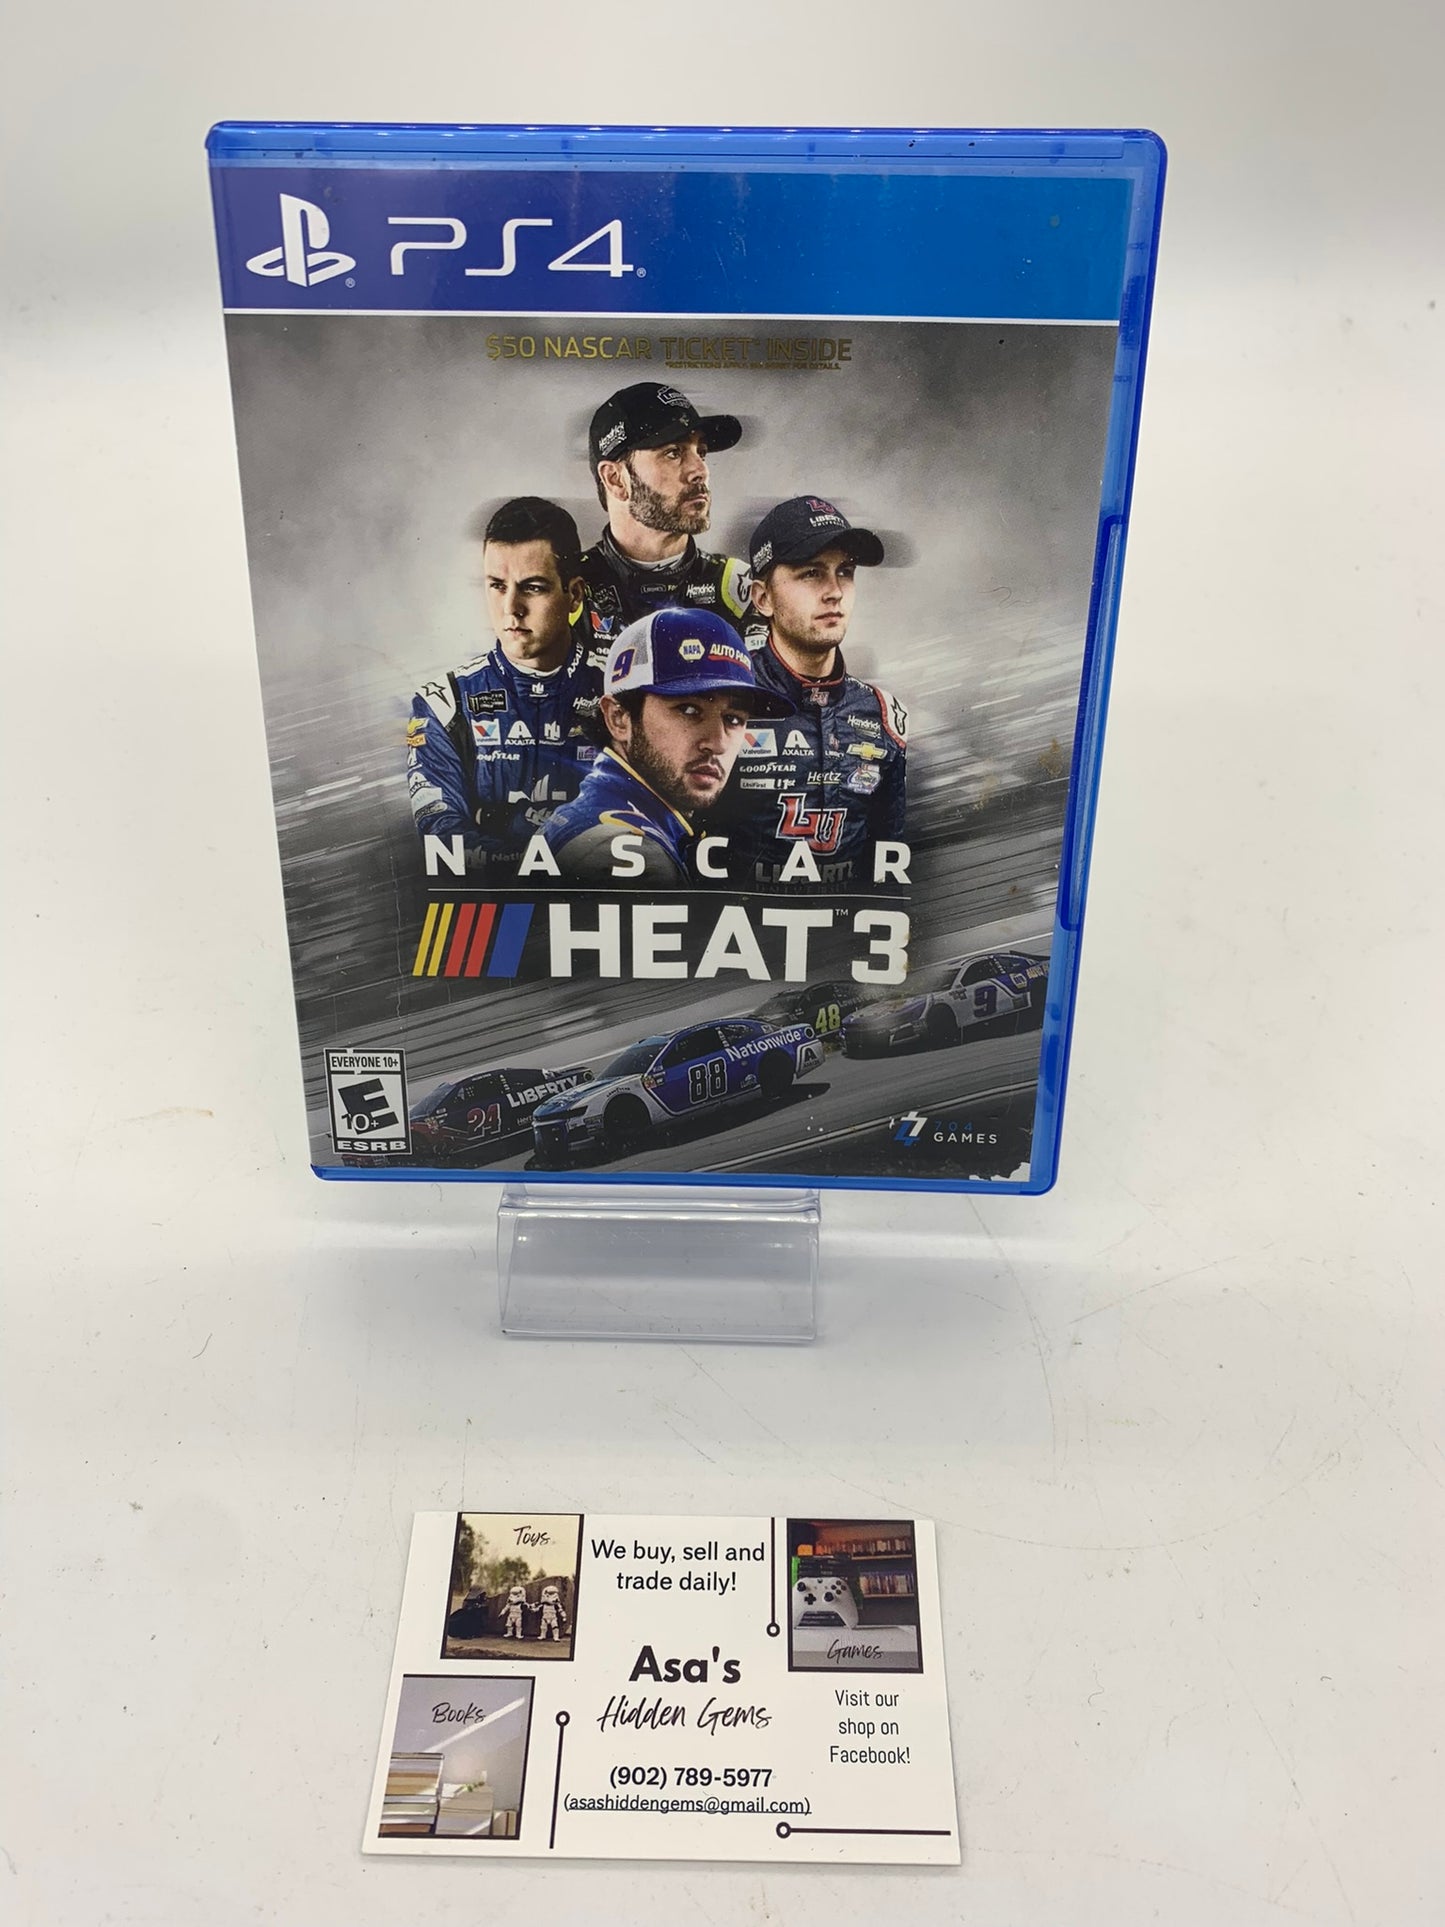 PS4 - NASCAR Heat 3 Video Game - Sony PlayStation 4